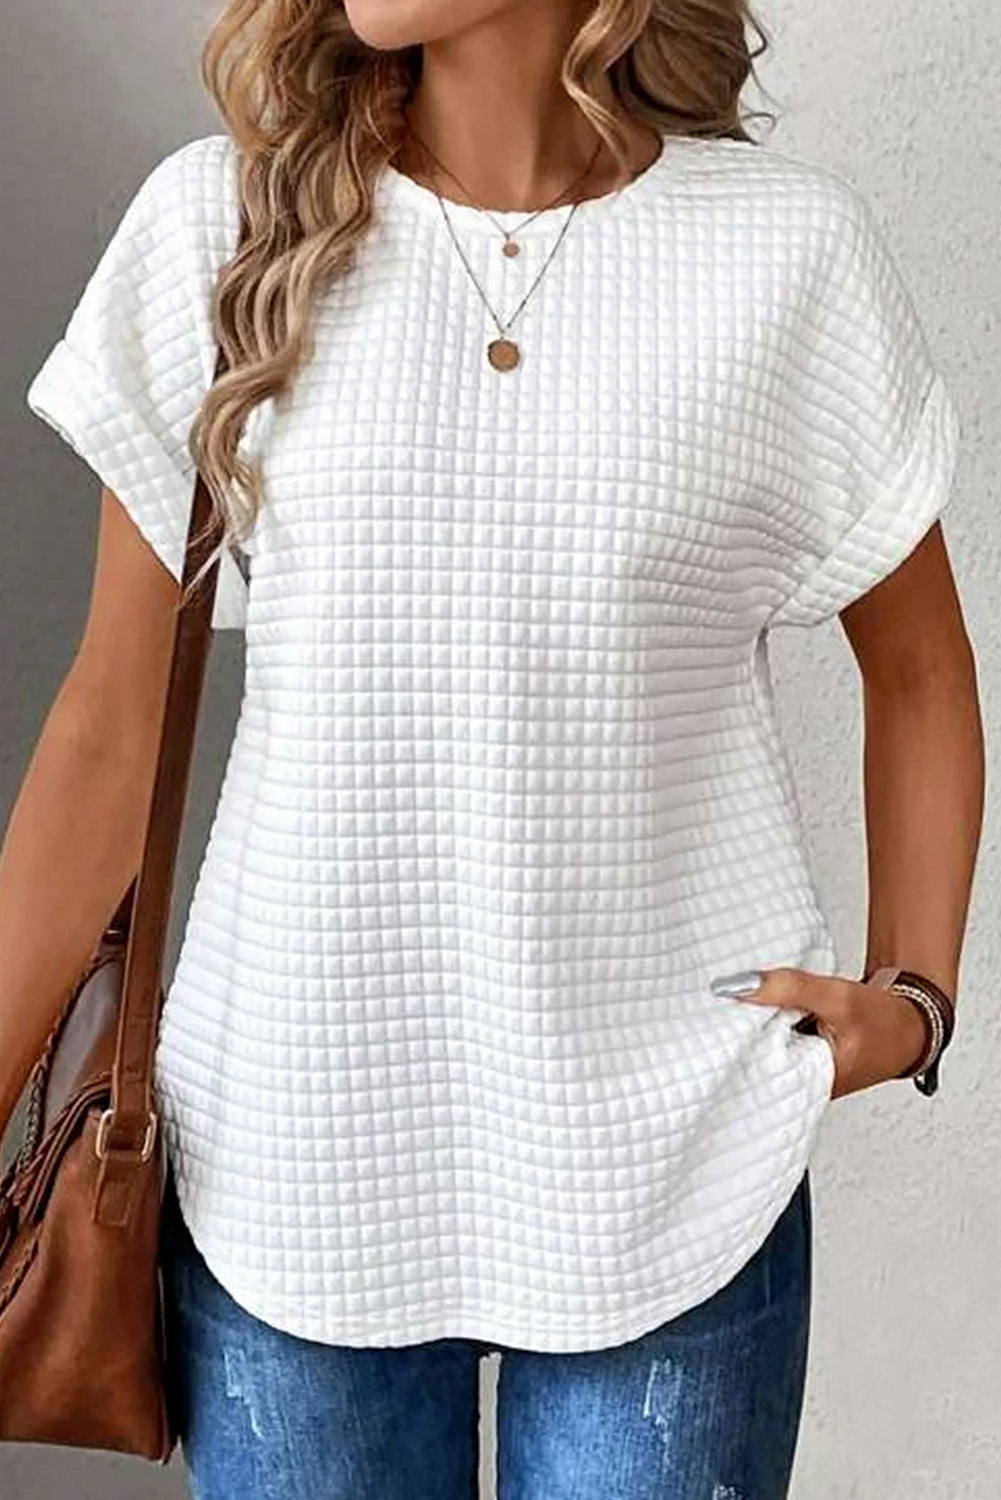 Chic white batwing blouse with a subtle texture, perfect for versatile styling and all-day comfort. A timeless addition to your wardrobe.